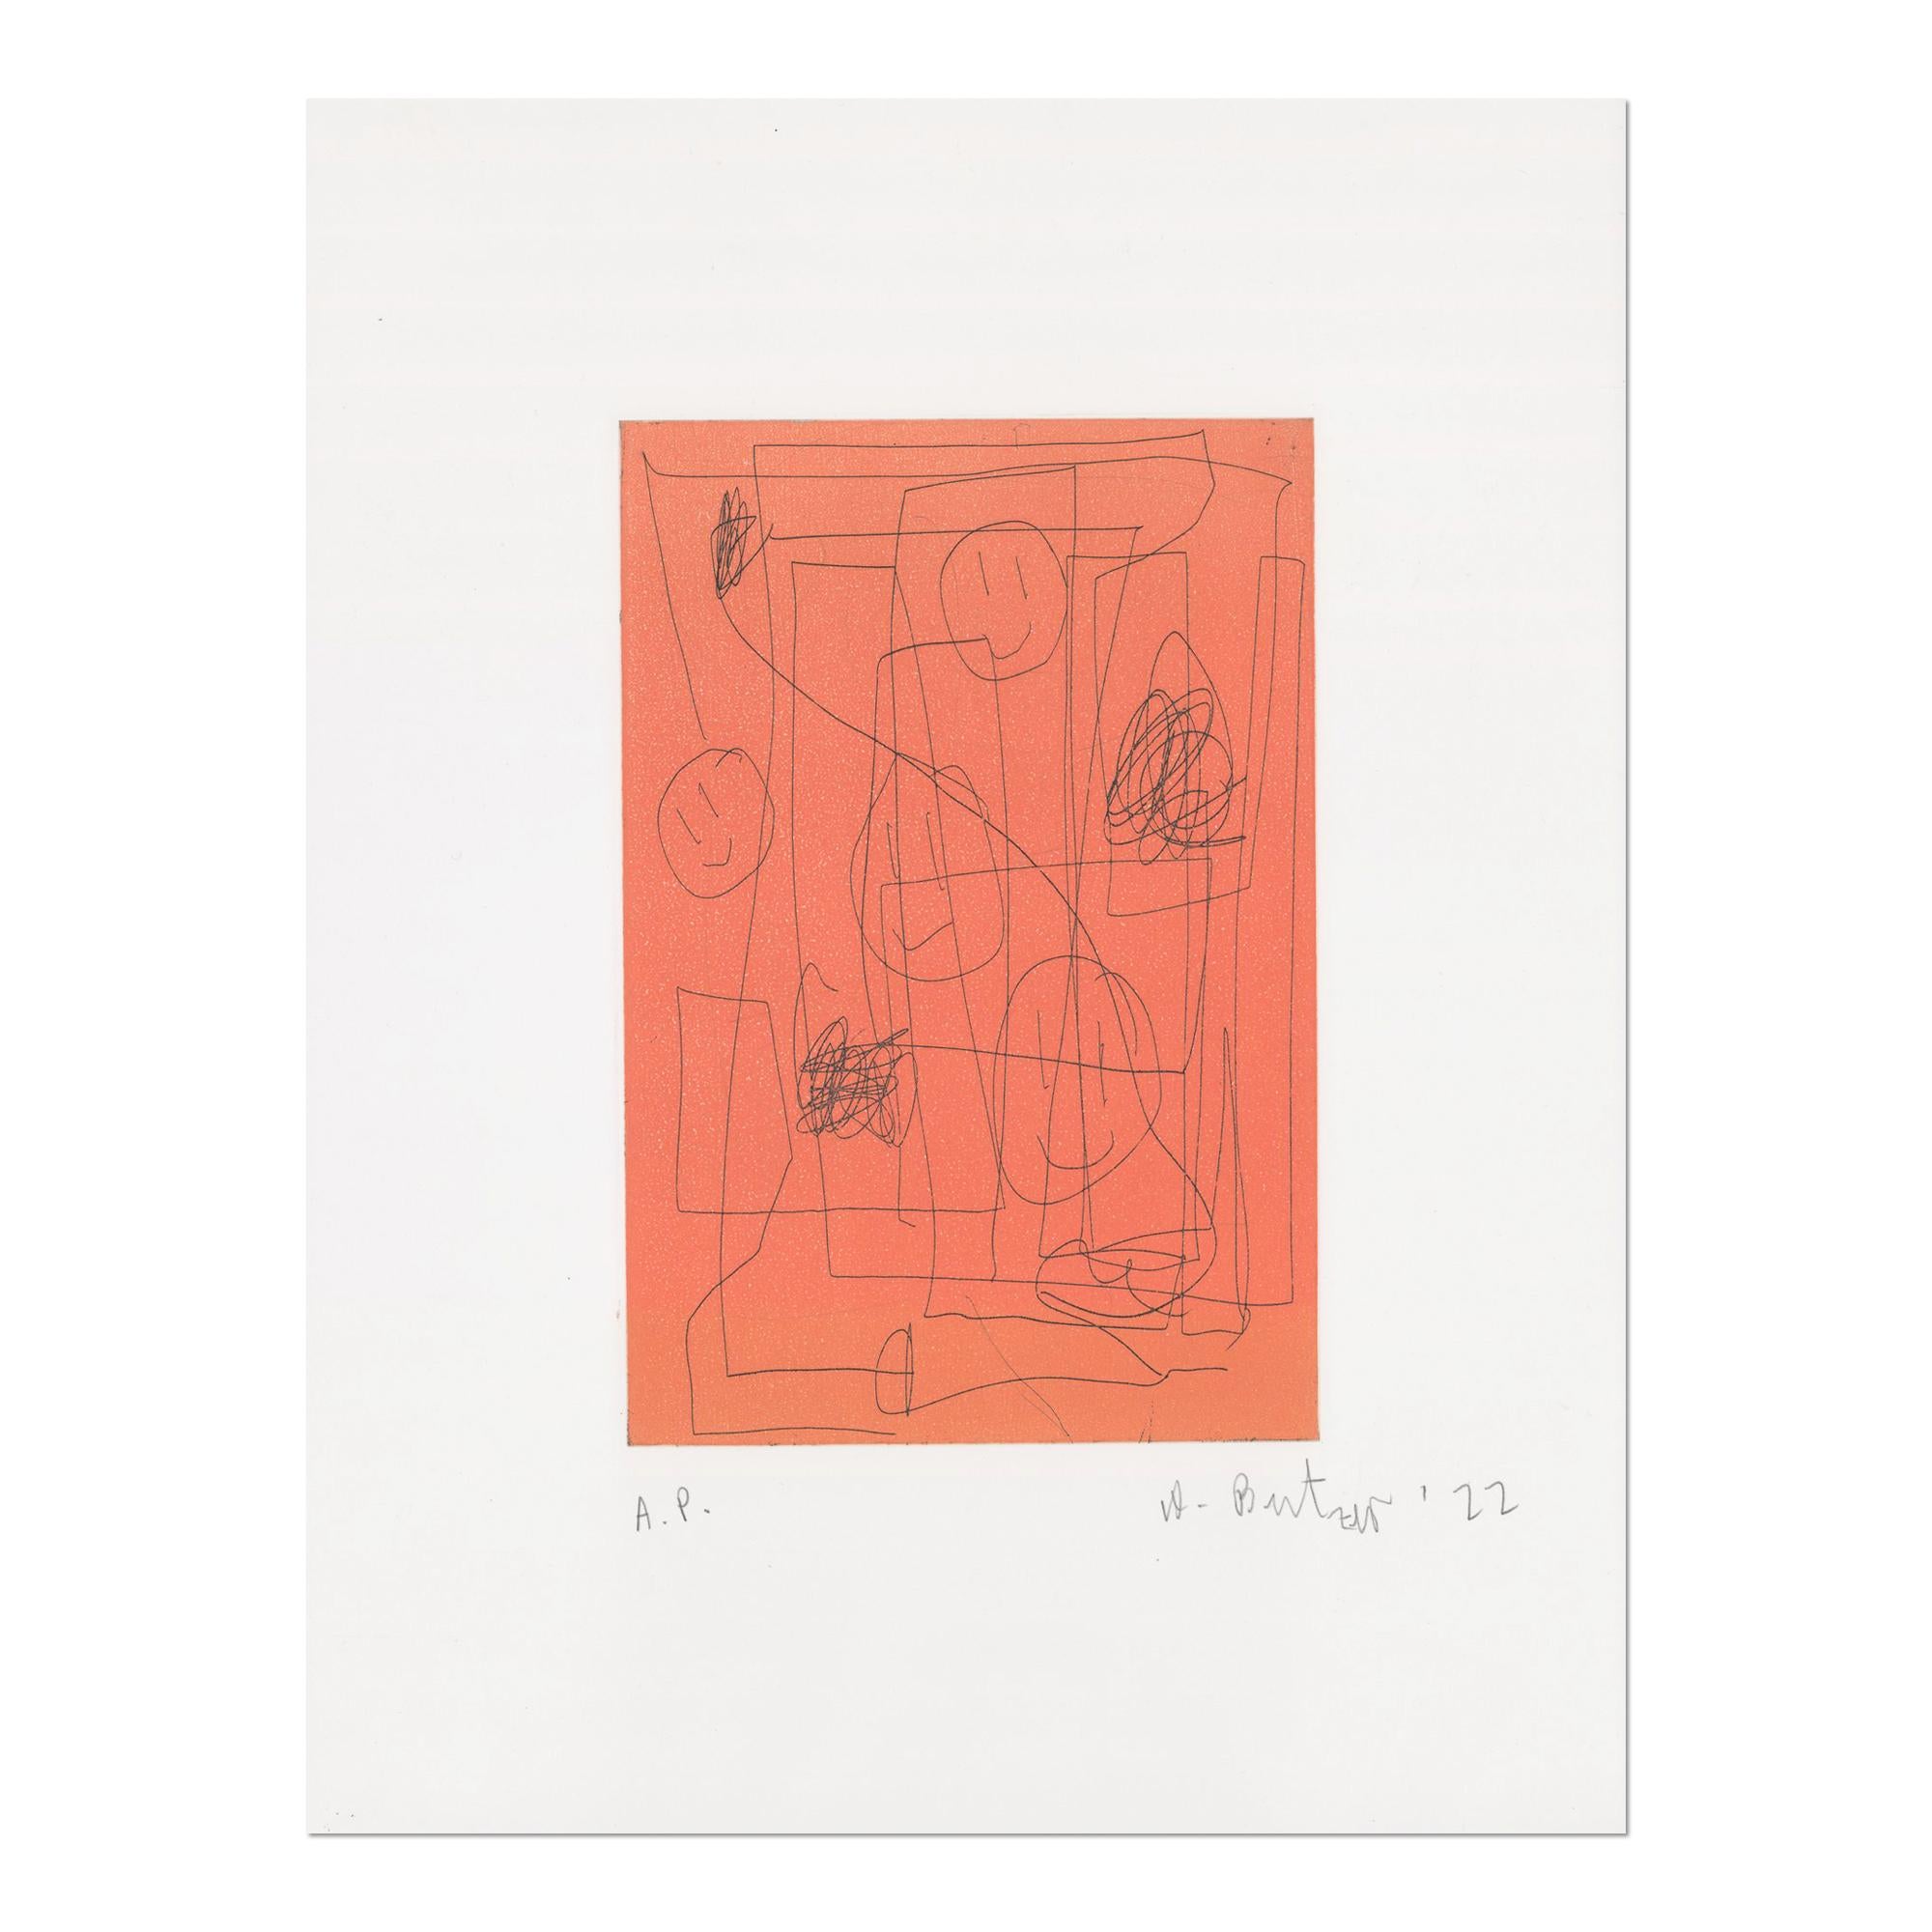 André Butzer (German, b. 1973)
Untitled (Smileys), 2019/2022
Medium: Etching in colors on wove paper
Dimensions: 43 x 33 cm
Edition of 15: Hand-signed, numbered and dated in pencil
Condition: Mint